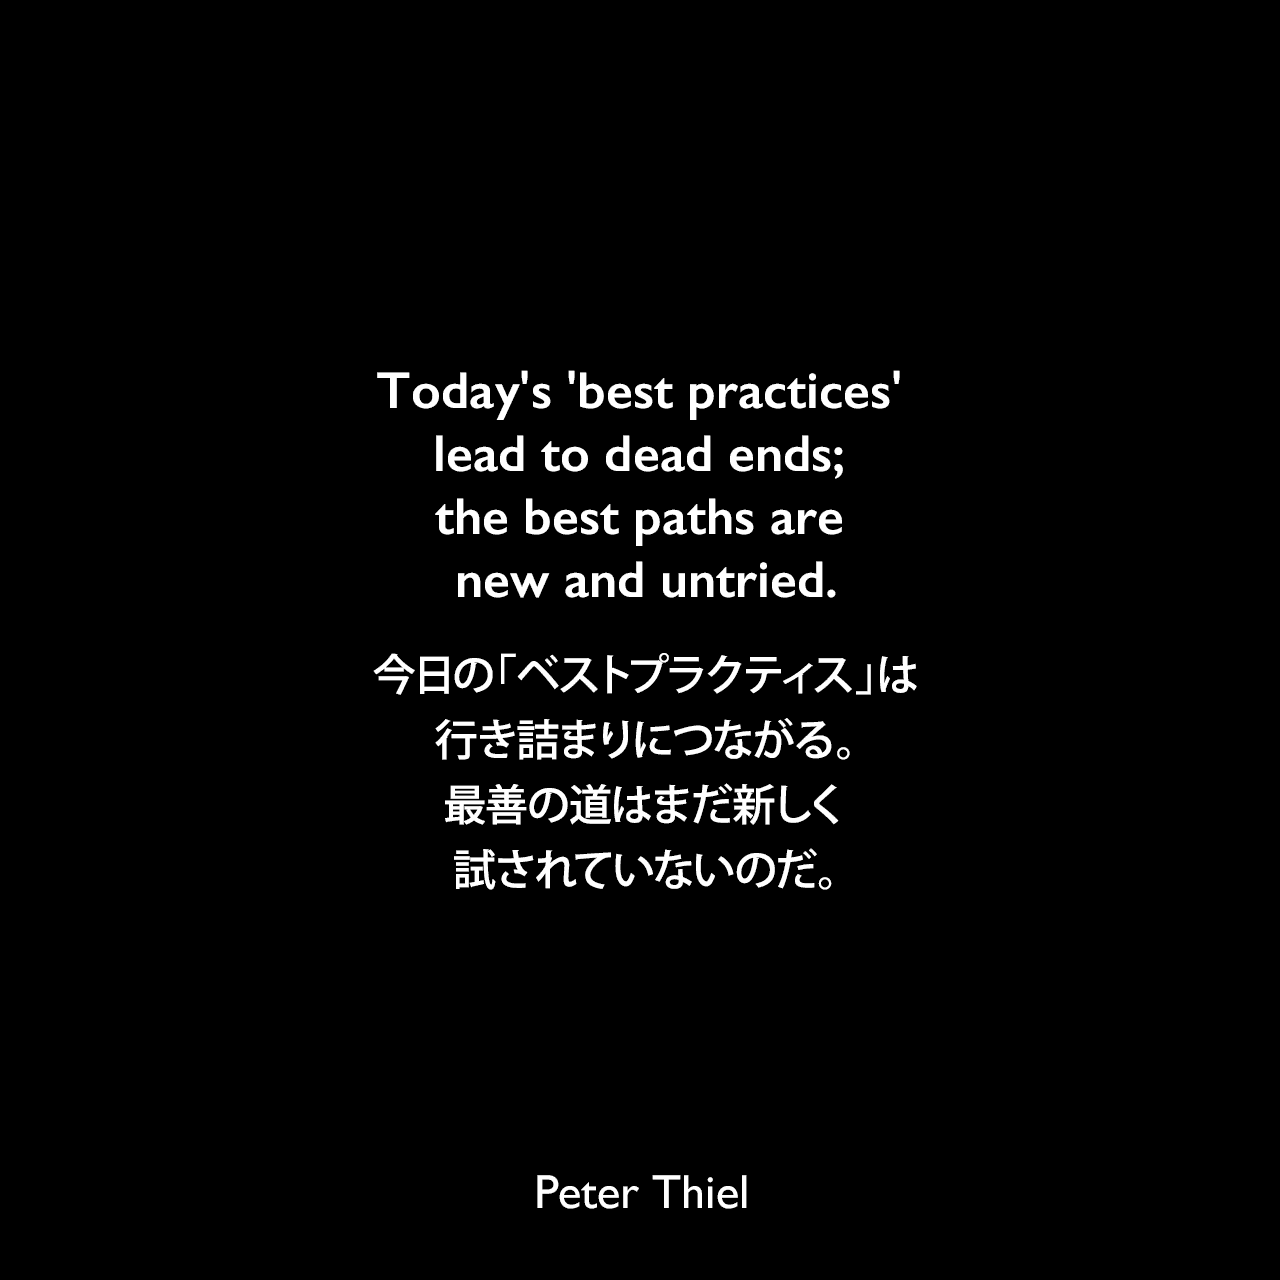 Today's 'best practices' lead to dead ends; the best paths are new and untried.今日の「ベストプラクティス」は行き詰まりにつながる。最善の道はまだ新しく、試されていないのだ。Peter Thiel